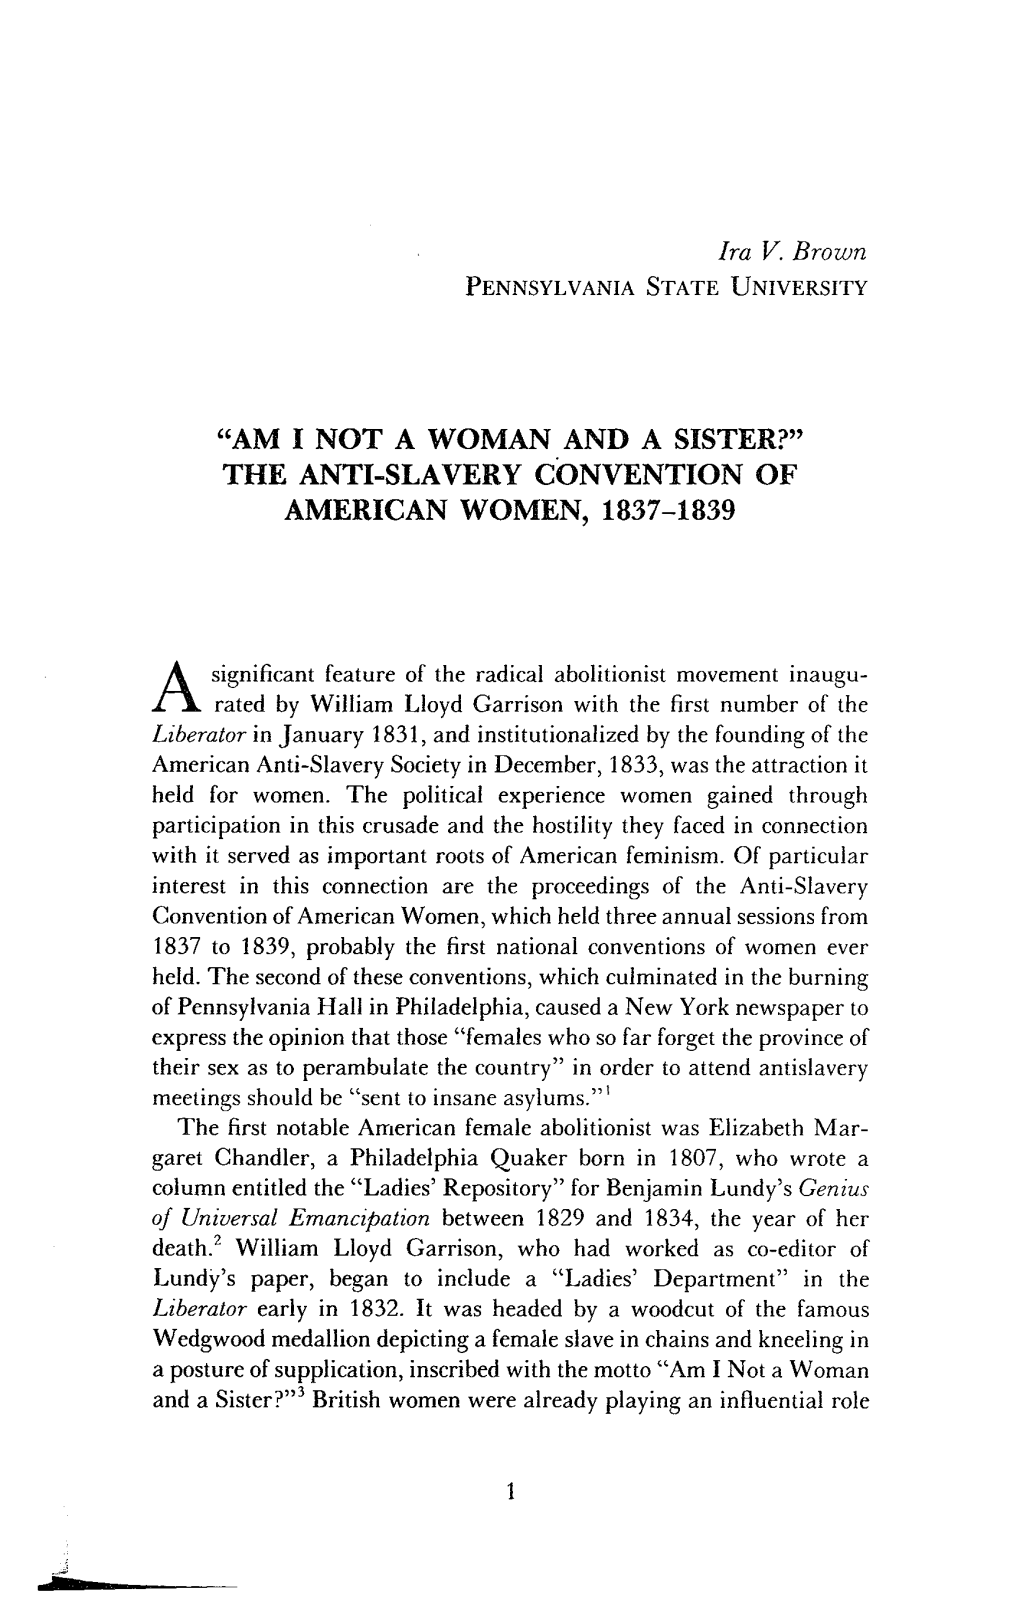 The Anti-Slavery Convention of American Women, 1837-1839